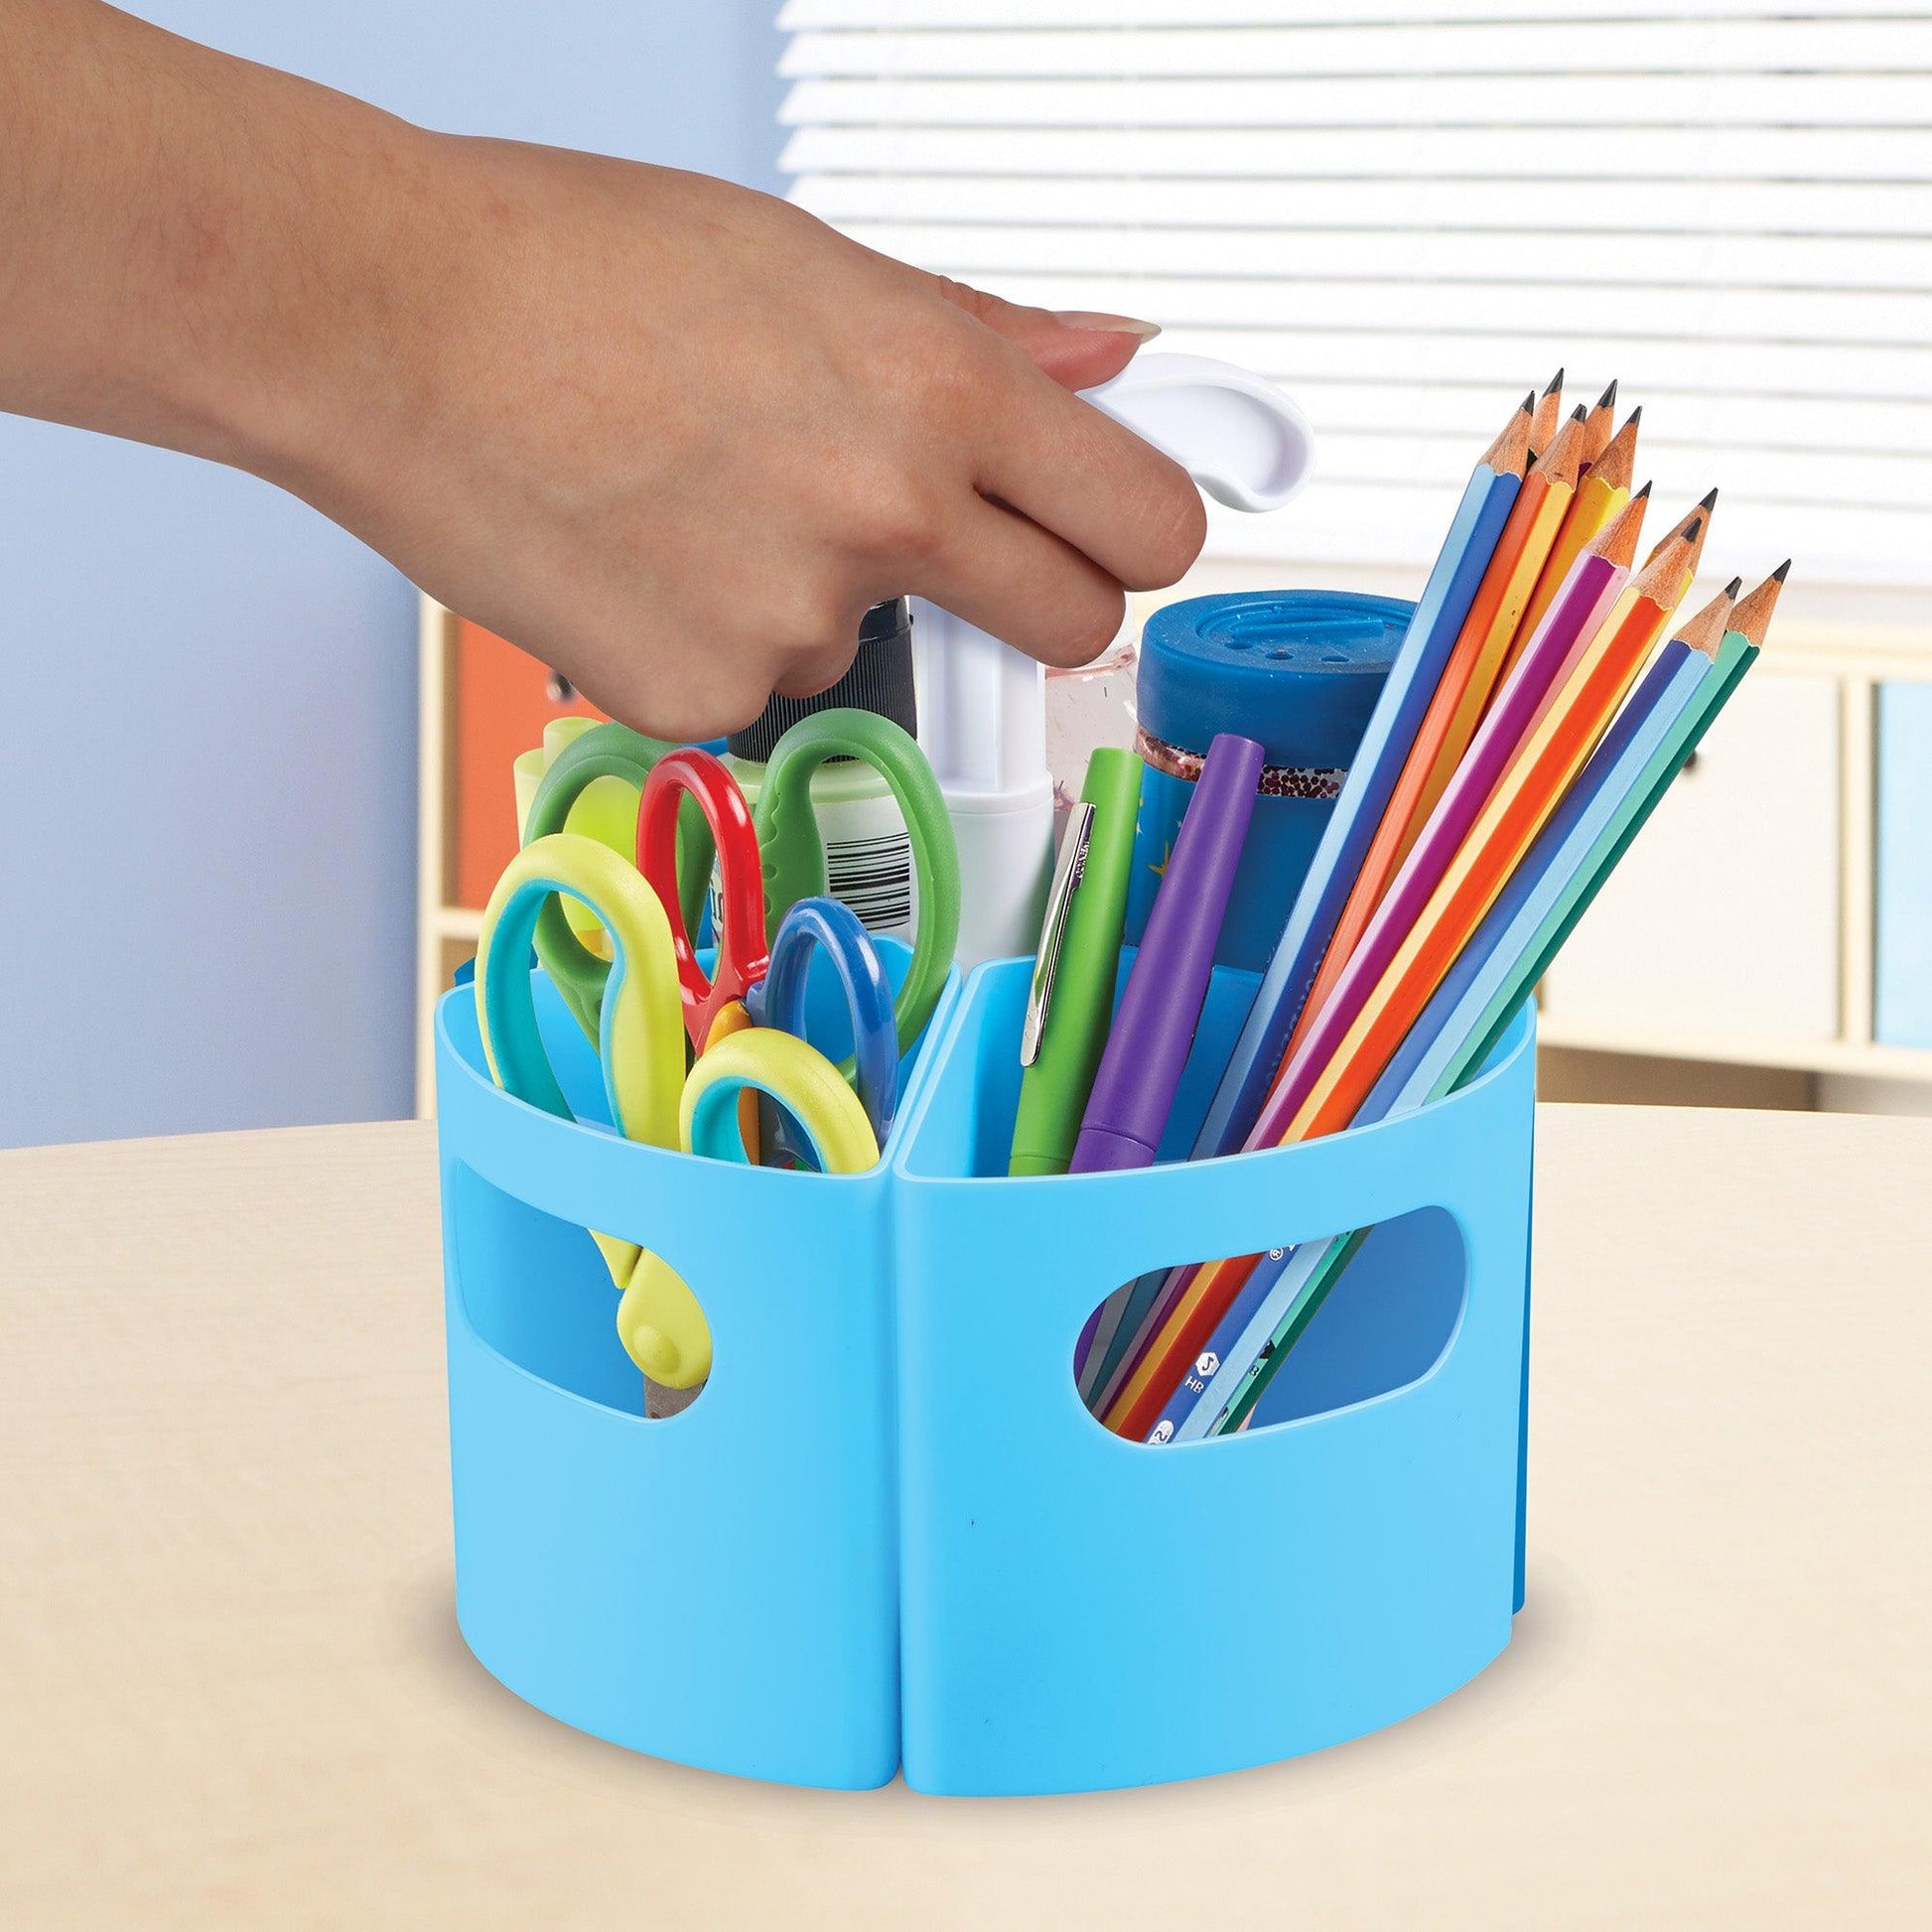 Pastel, Desk and Art and Crafts Organizer, Maker and Crayon Organizer, Homeschool Organizer and Storage Blue, Pack of 2 - Loomini